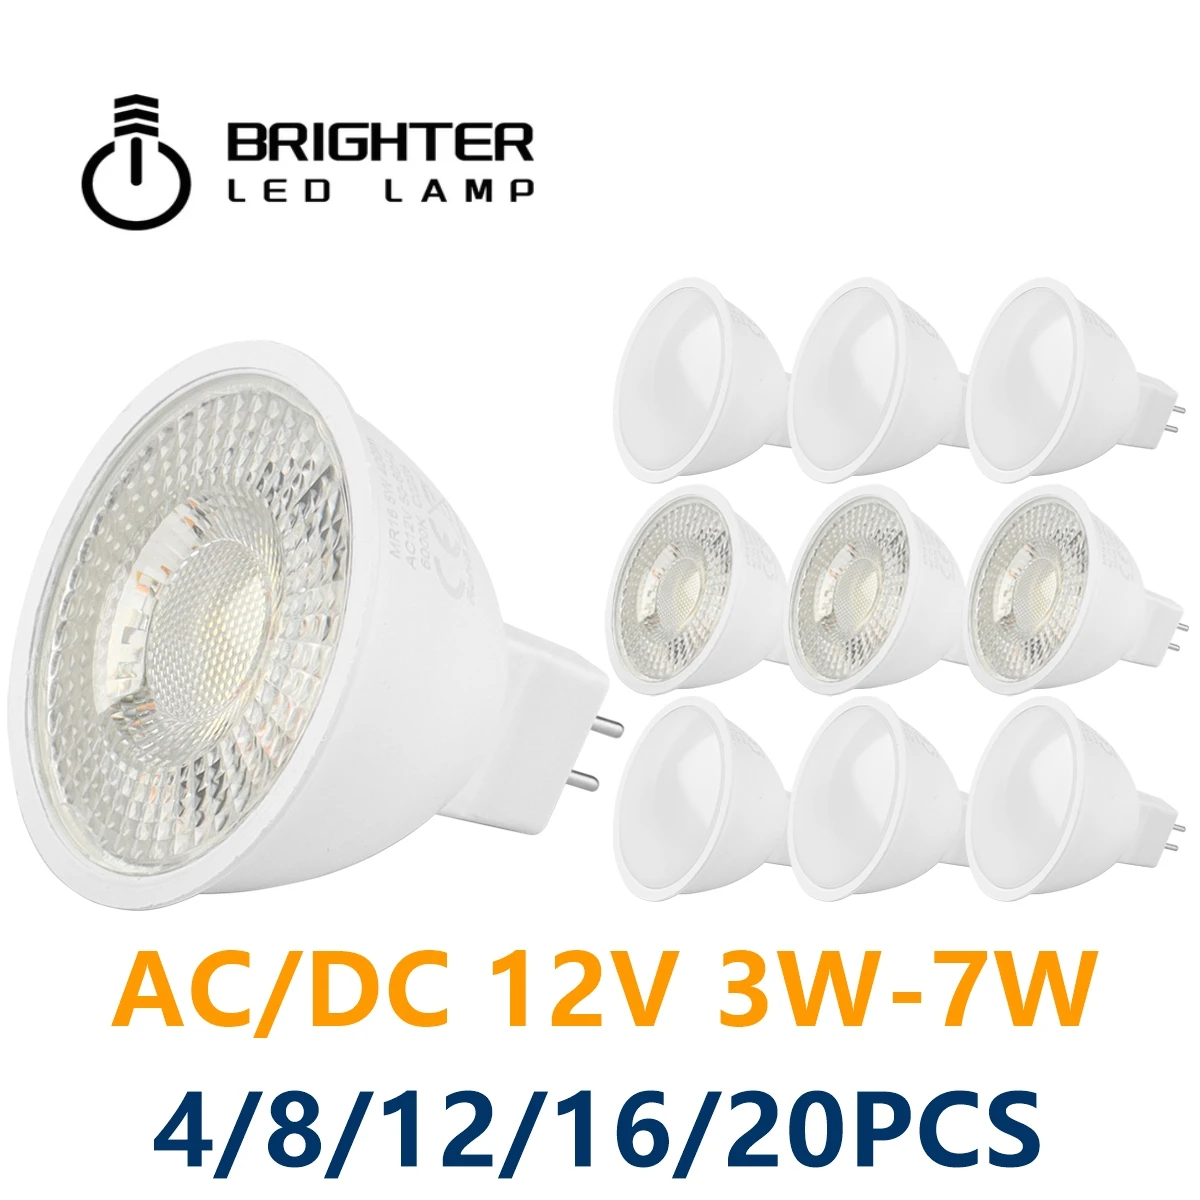 Led Bulb MR16 GU5.3  LED Lamp Spotlight low tension  AC/DC12V 3W 5W 6W 7W Beam Angle 120/38 Degree for home Energy Saving indoor